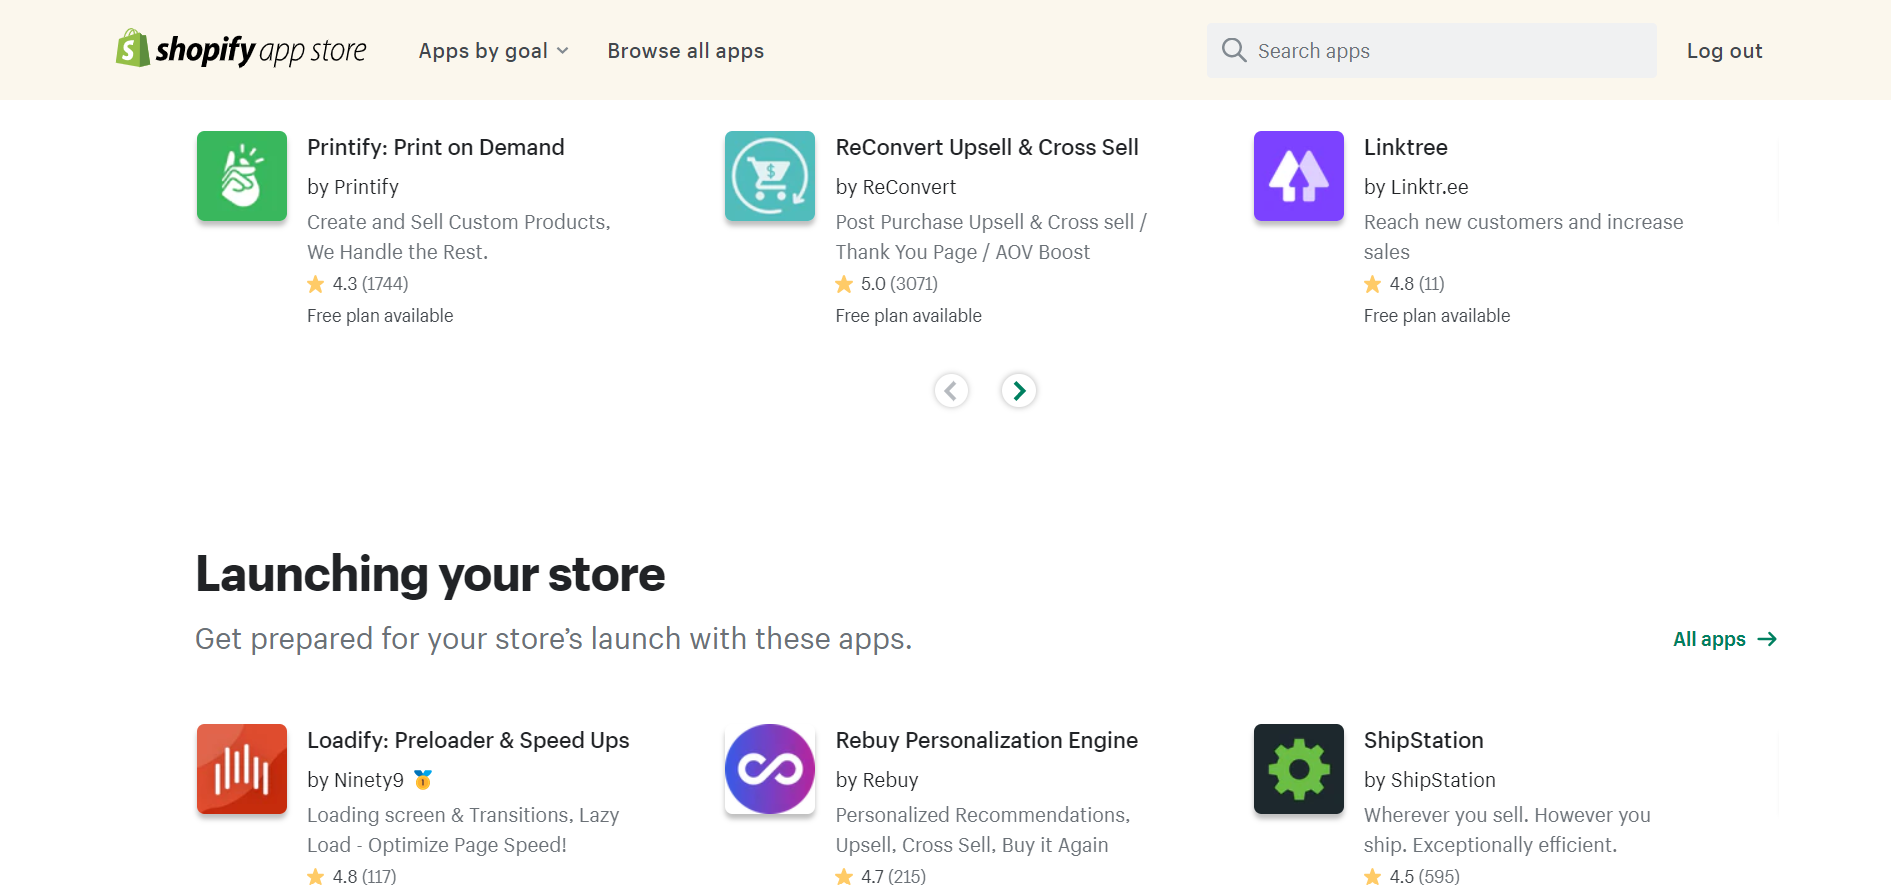 Shopify's app store